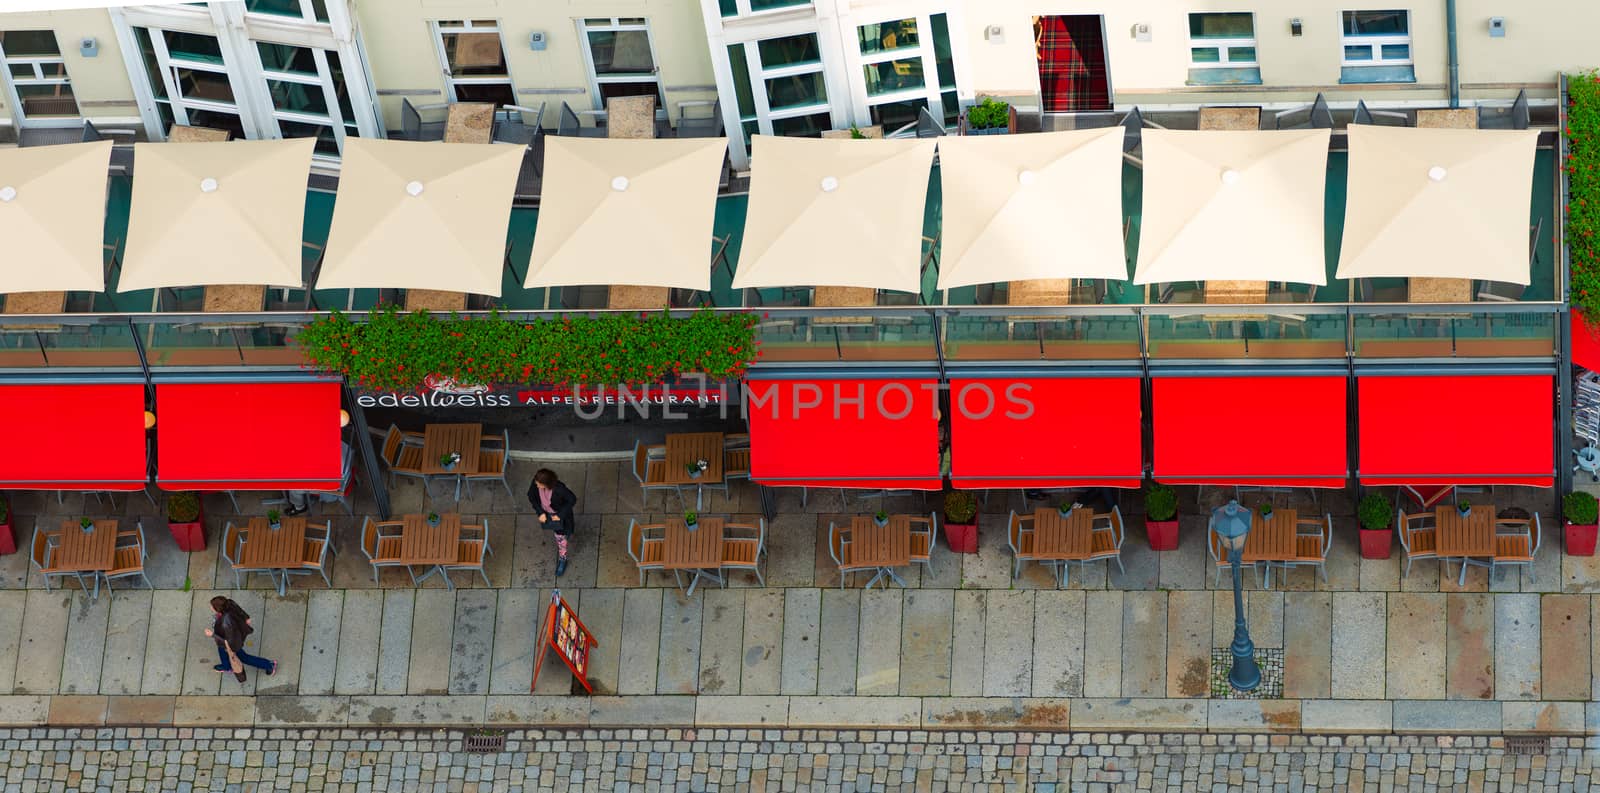 DRESDEN, GERMANY - SEPTEMBER 22, 2014: Top down view on street of Dresden, state of Saxony, Germany, Europe. Restaurant and people down below.